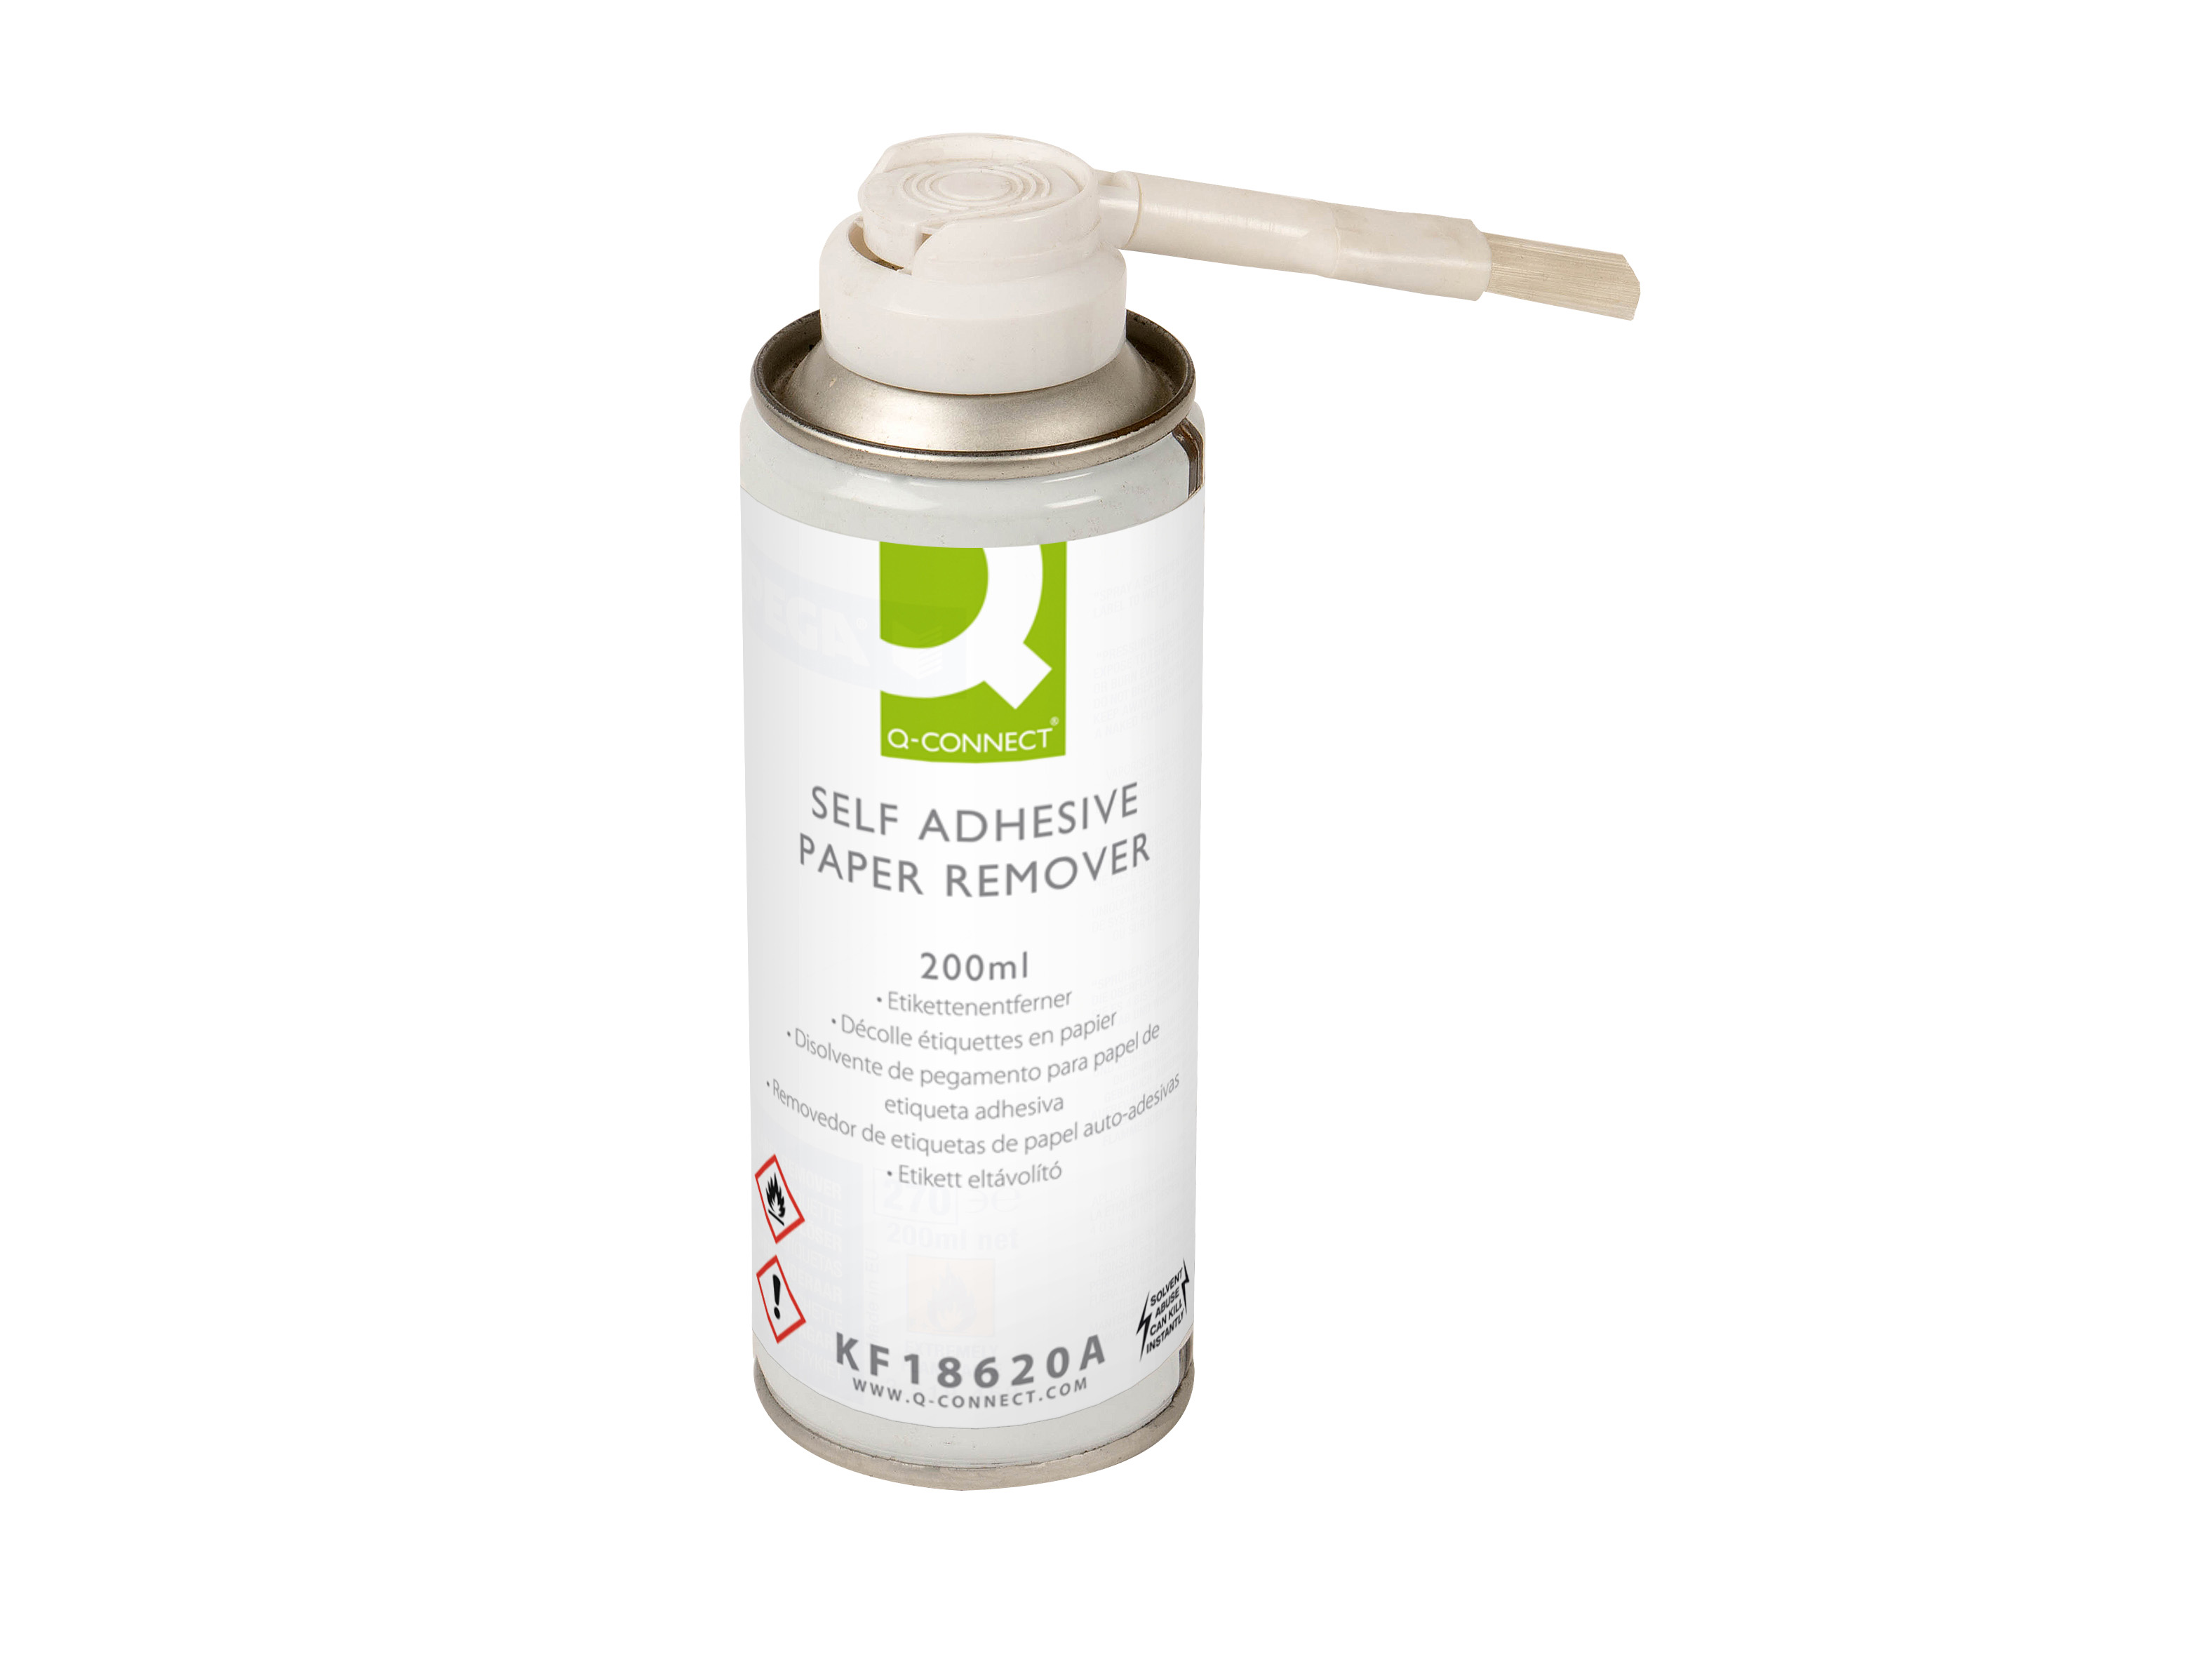 Self adhesive paper remover 200ml | Q-Connect